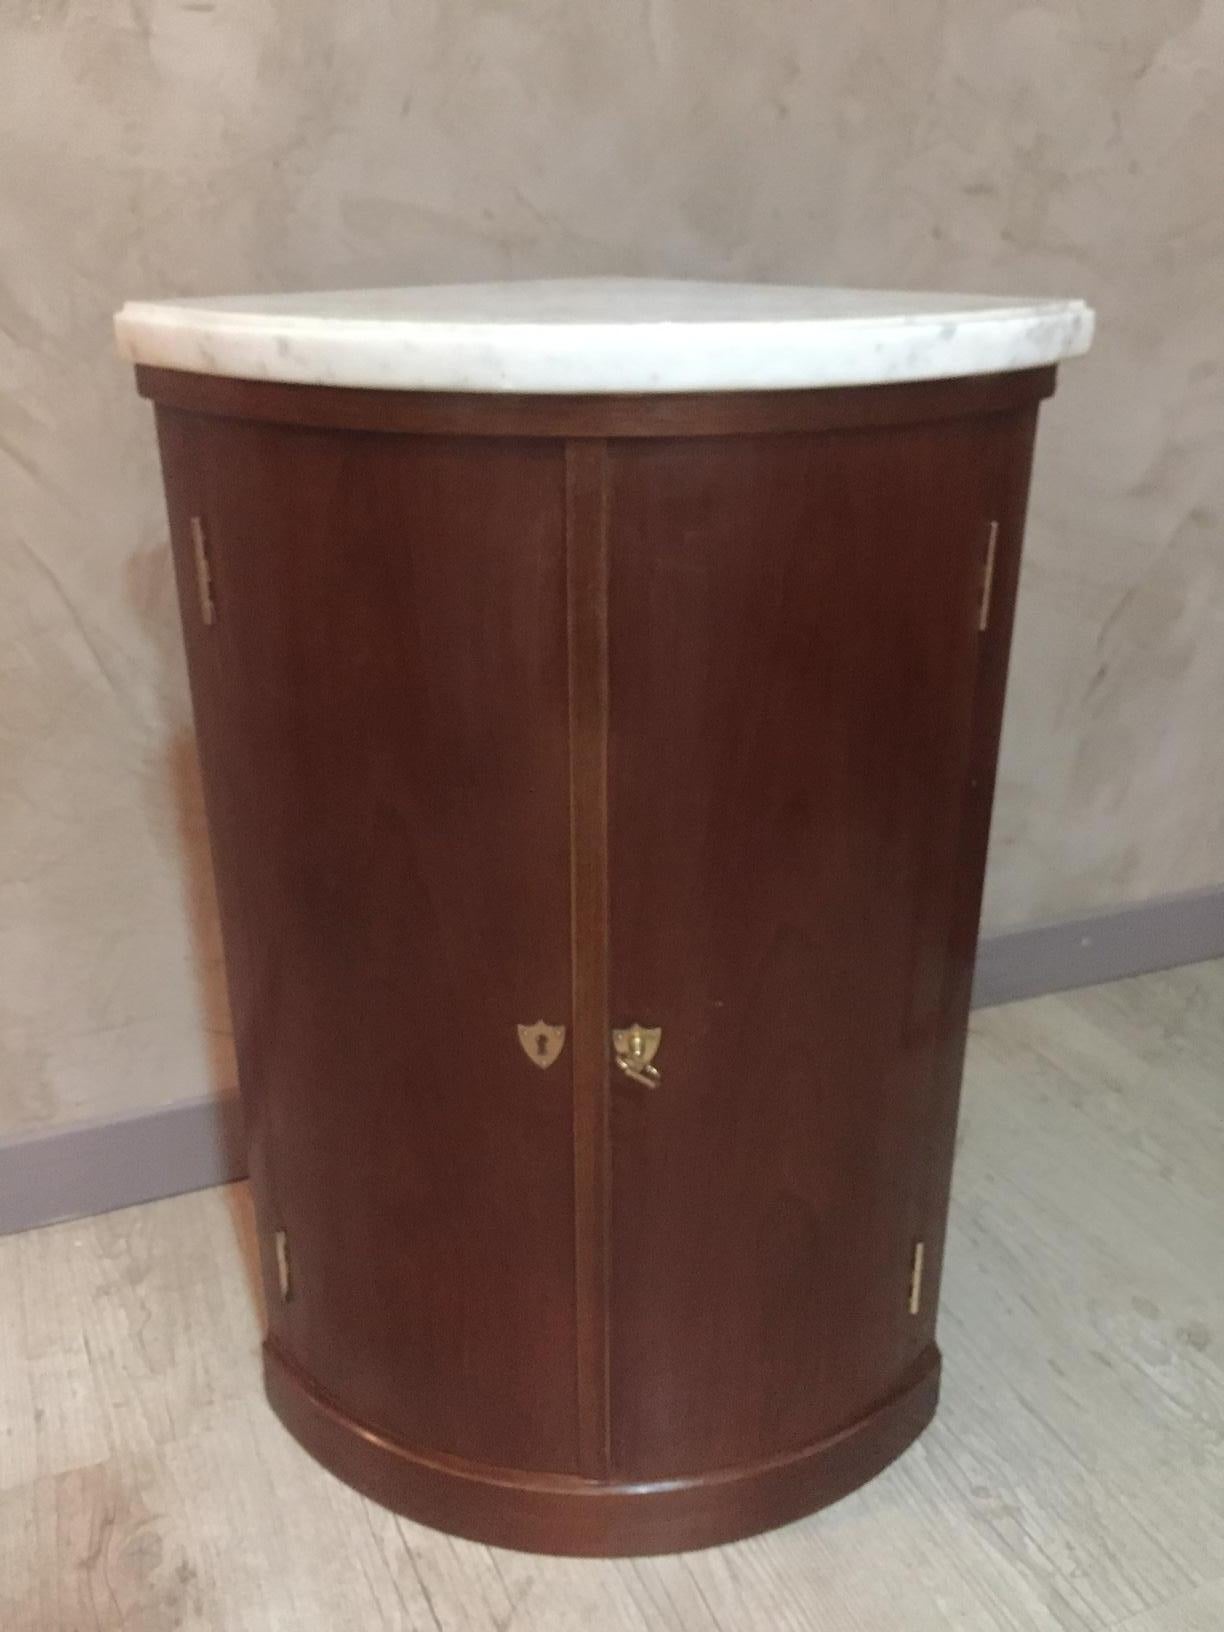 Very nice 20th century, French mahogany corner cupboard with a marble top from the 1930s.
Two opening doors with a gilded brass lock. Two shelves inside.
Good quality. Removable marble top.